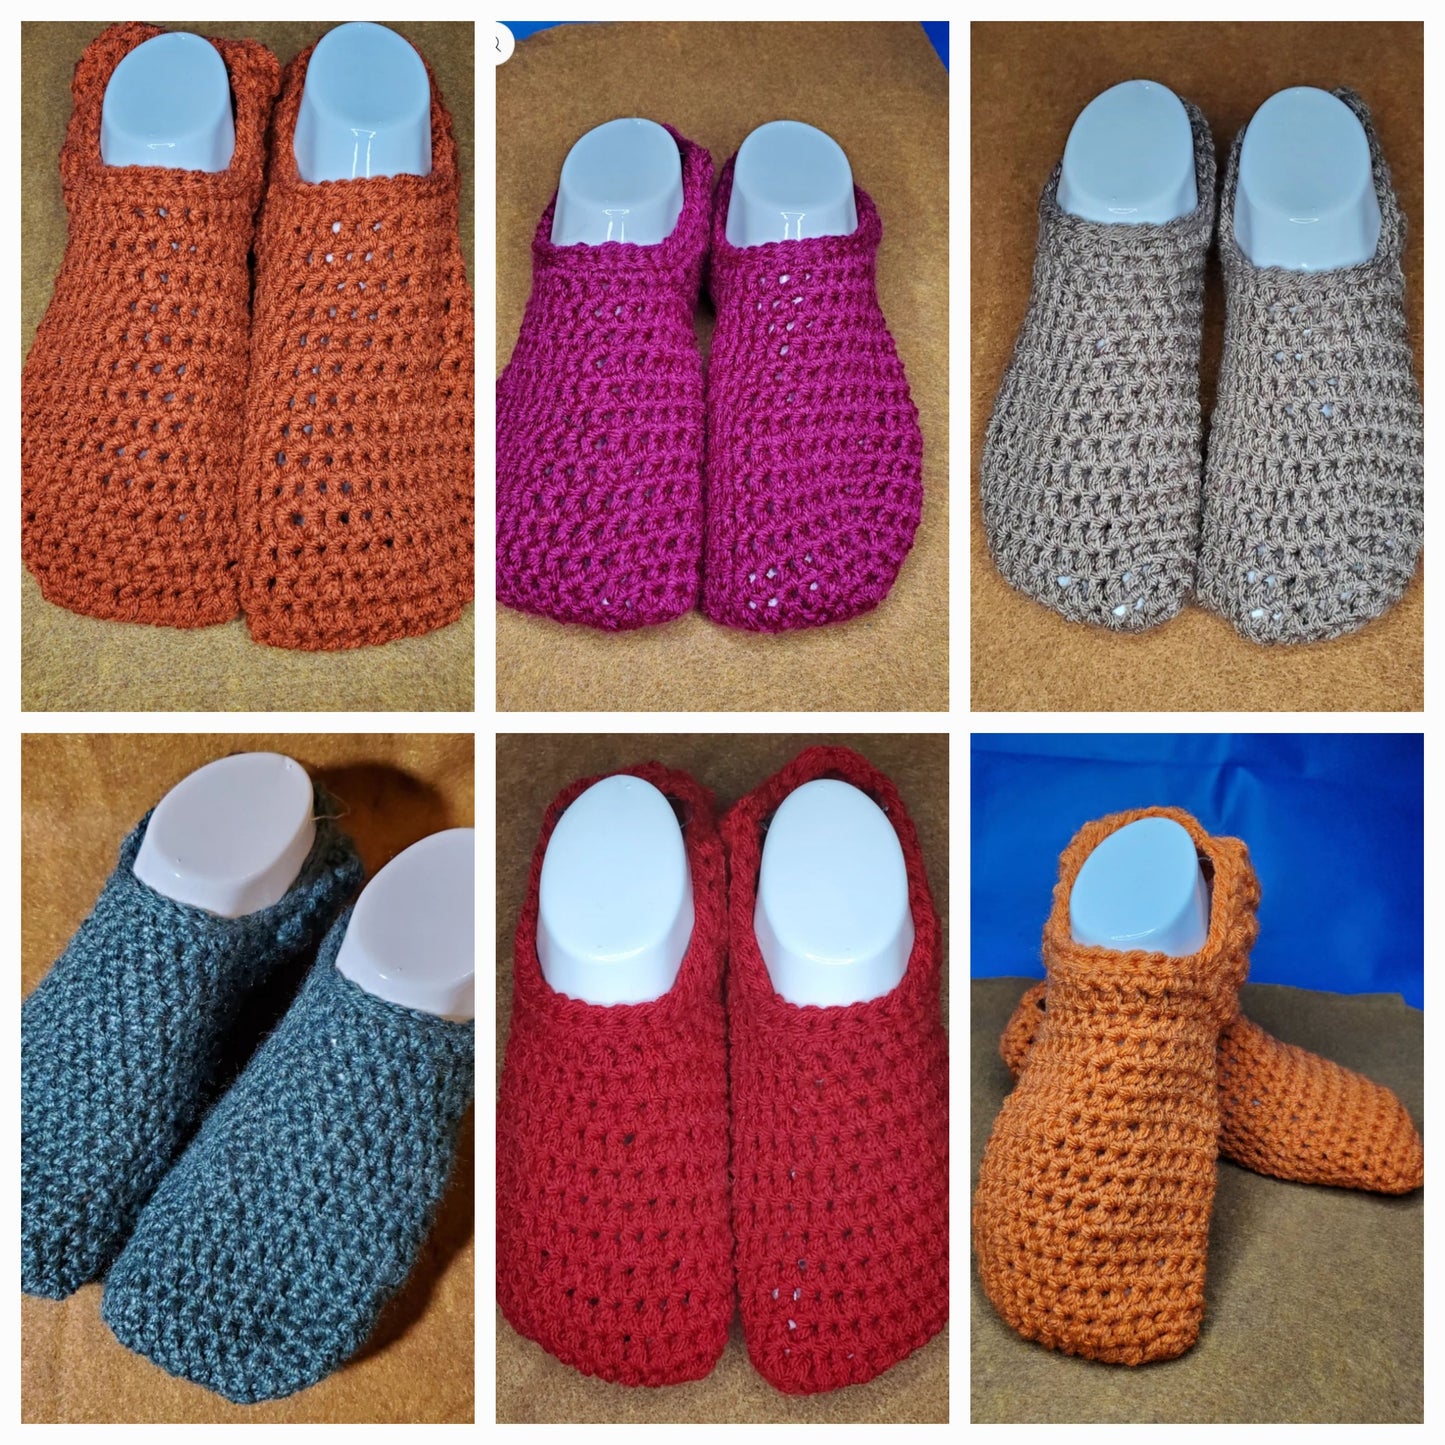 Slippers - crocheted slippers - Ladies Sizes